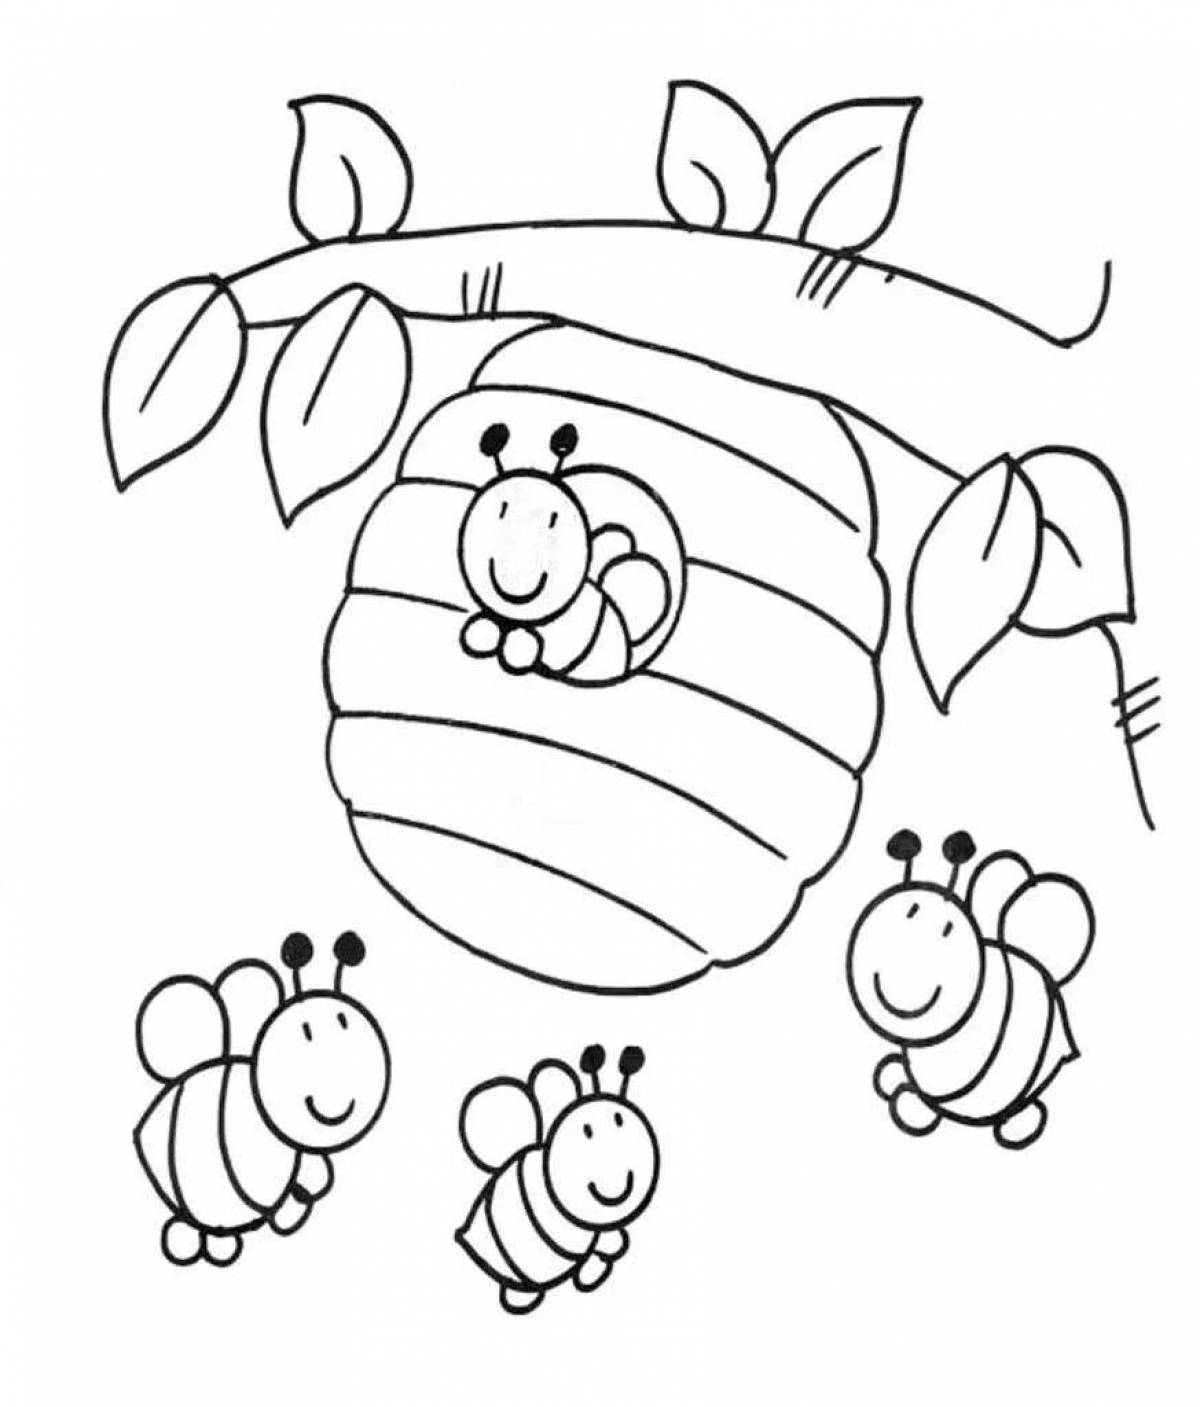 Playful beehive coloring book